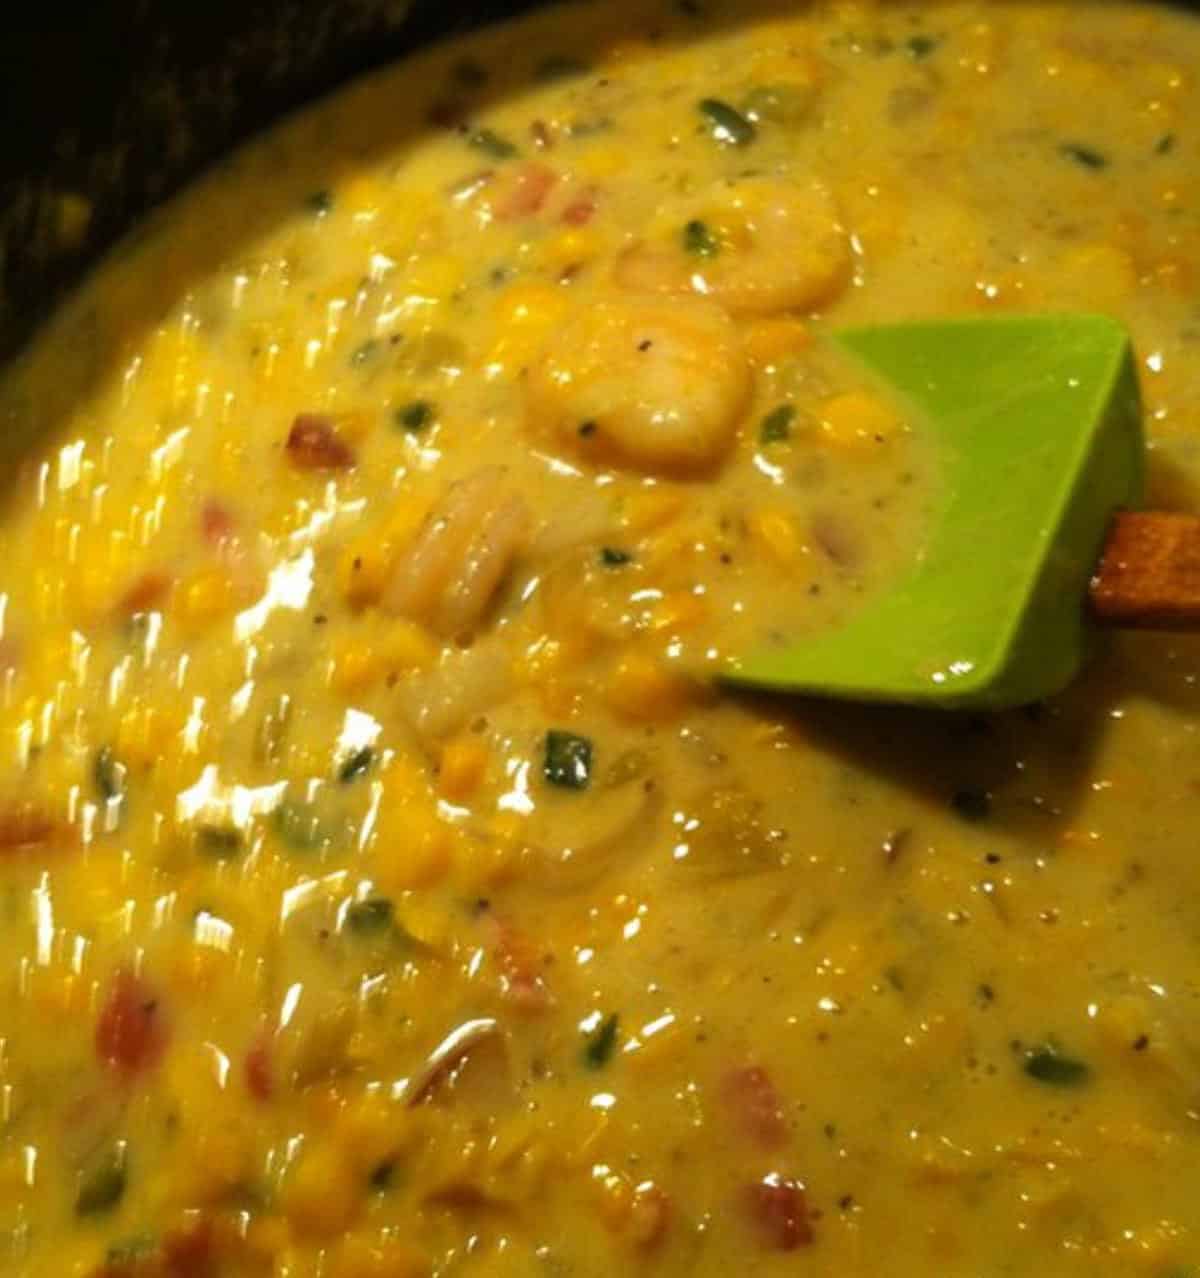  Add a bit of heat with the diced poblanos, balanced by the sweetness of the corn.